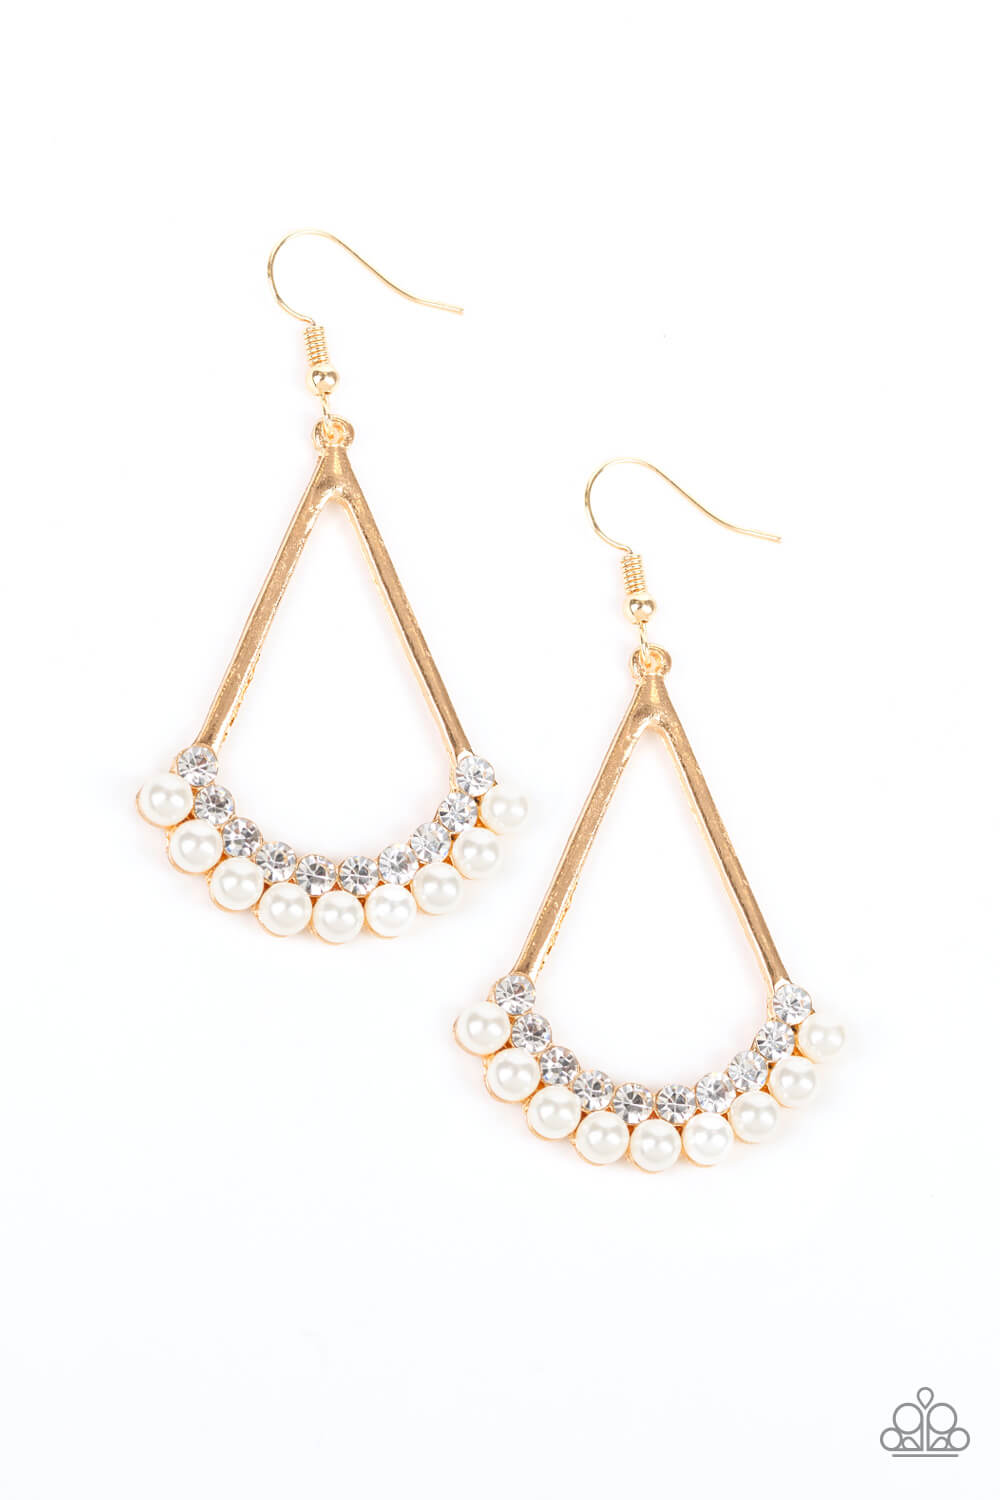 Top to Bottom - Gold & White Pearl Earrings - Princess Glam Shop